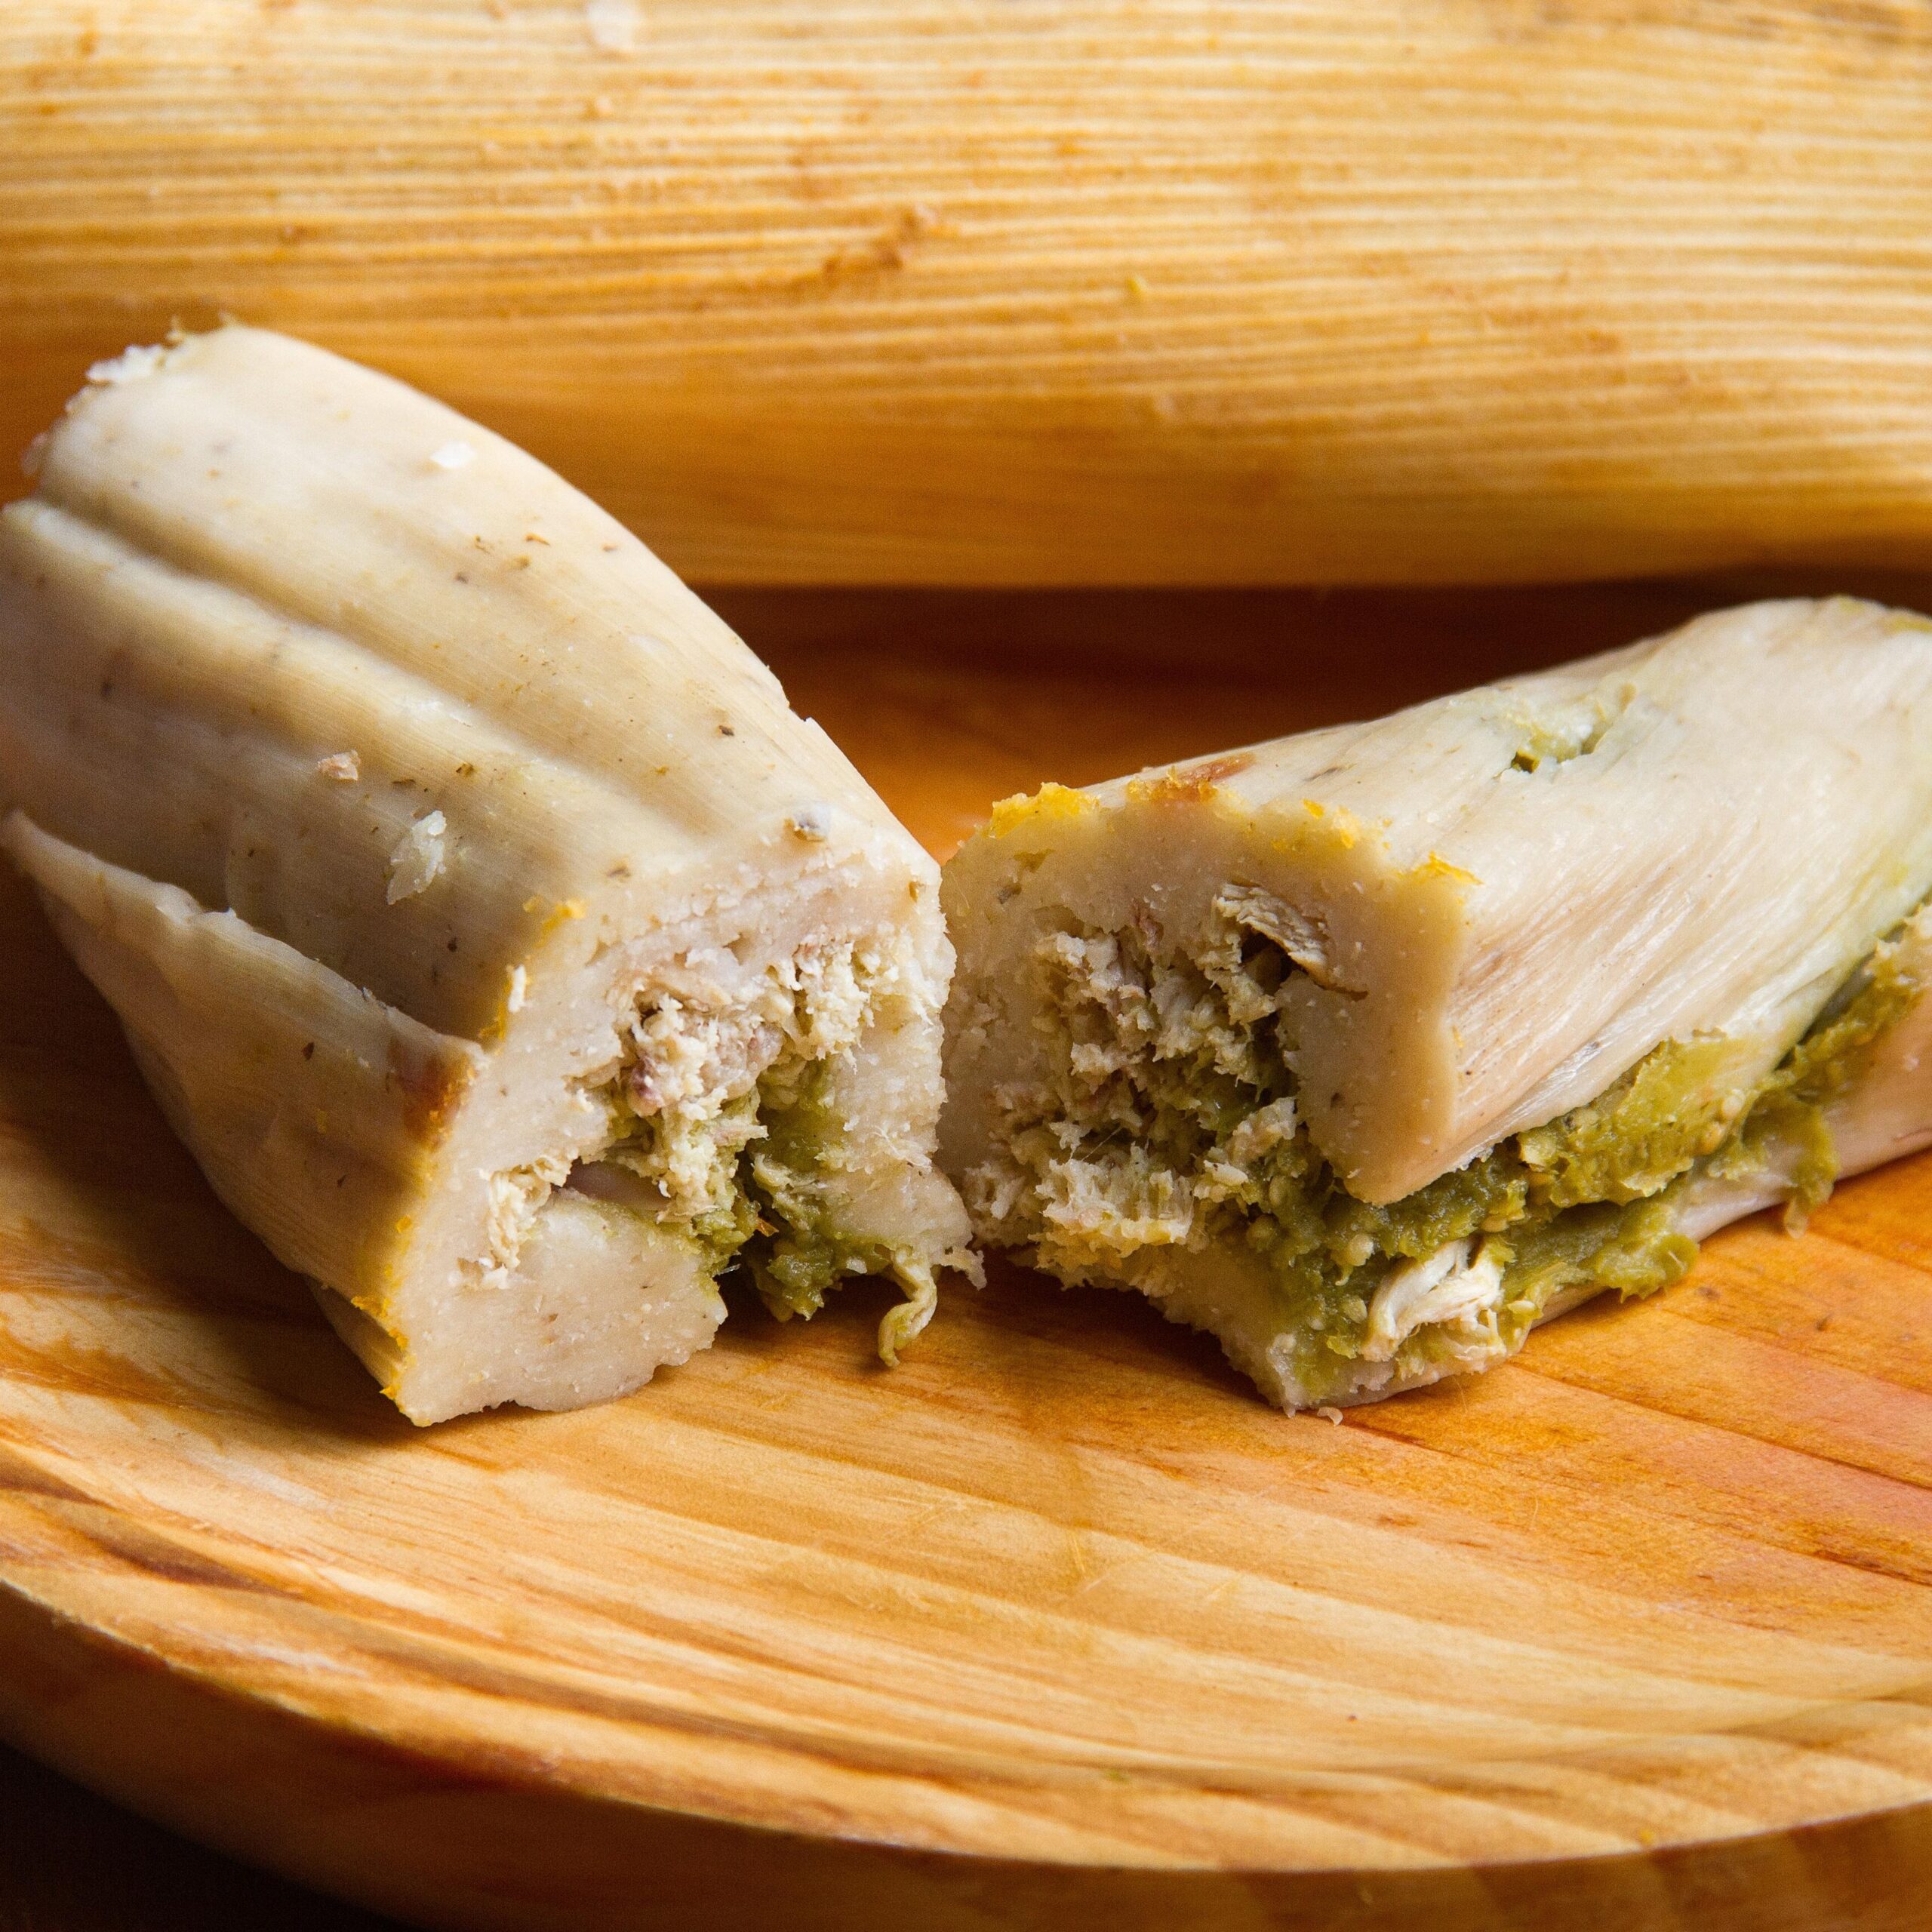  Get ready to indulge in our delicious hand-wrapped Tamales